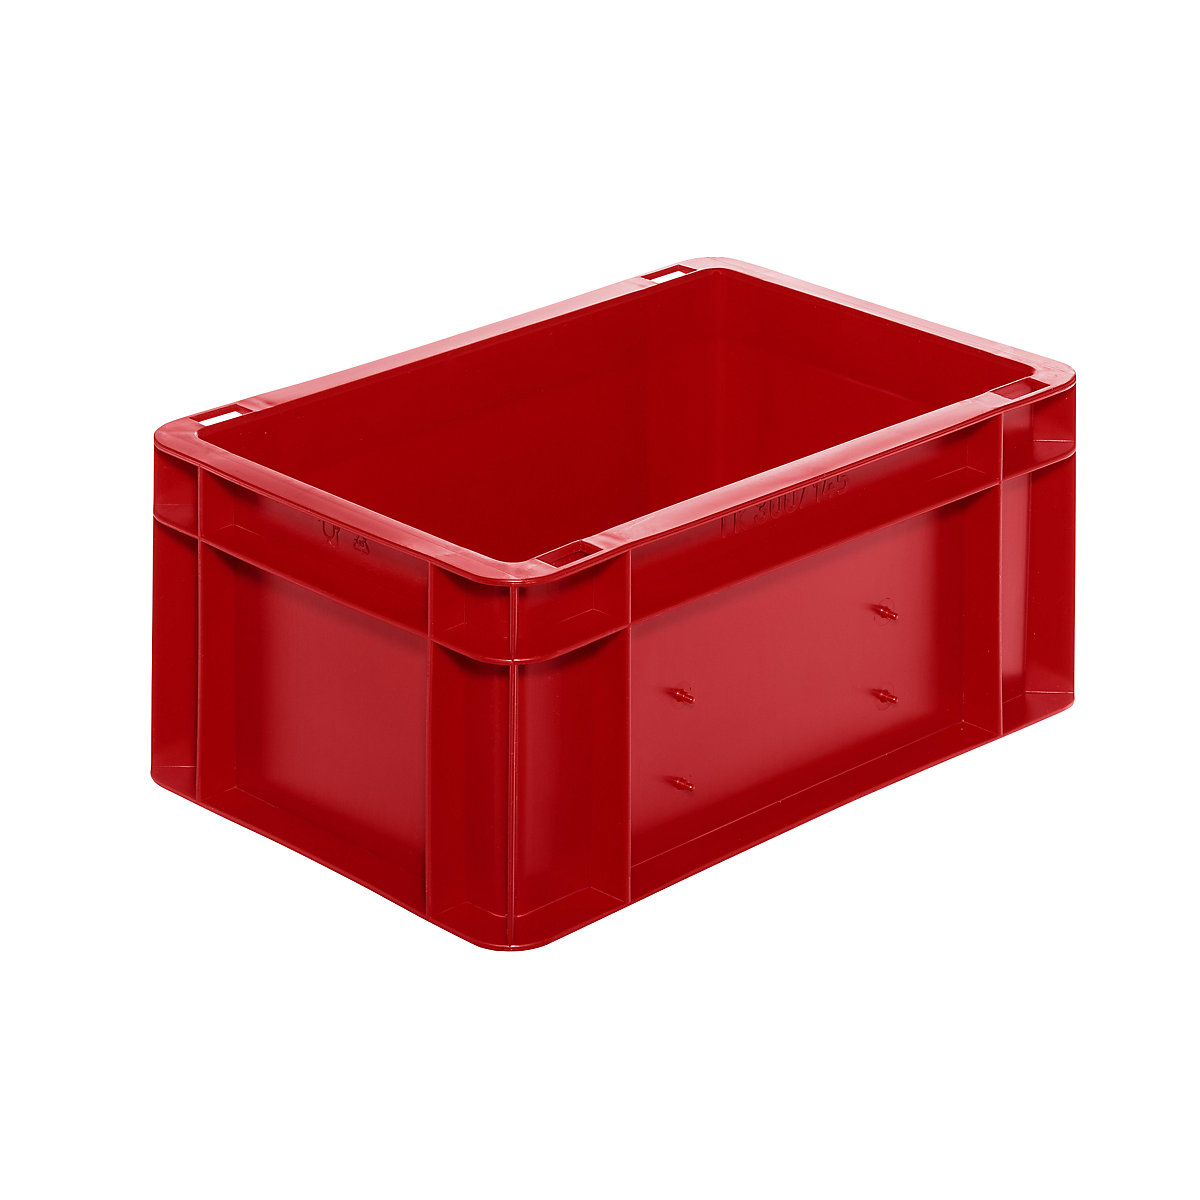 Euro stacking container, closed walls and base, LxWxH 300 x 200 x 145 mm, red, pack of 5-7